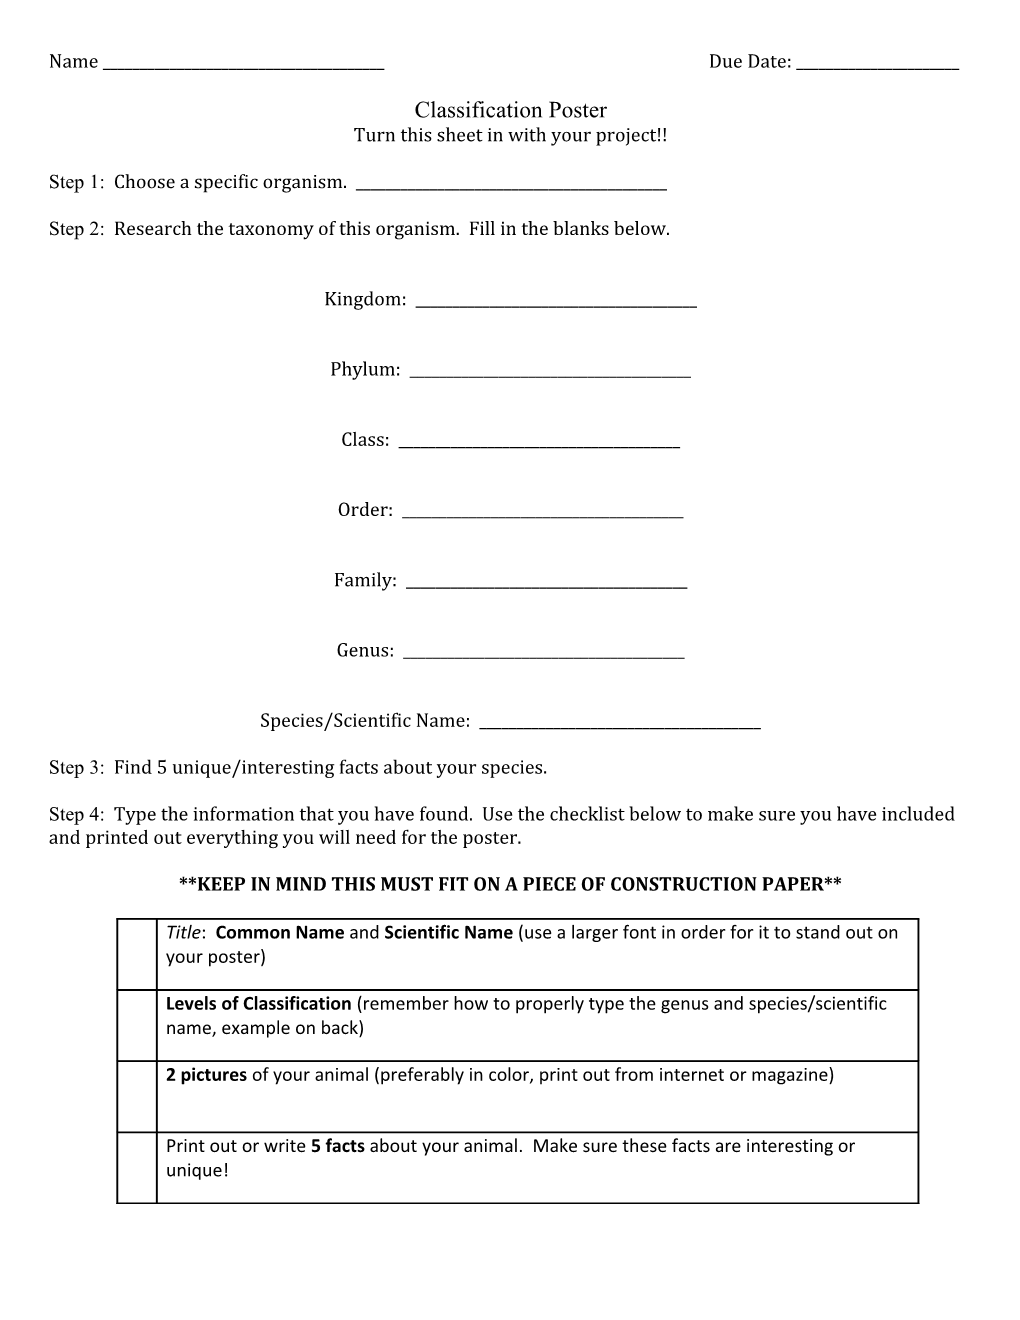 Turn This Sheet in with Your Project